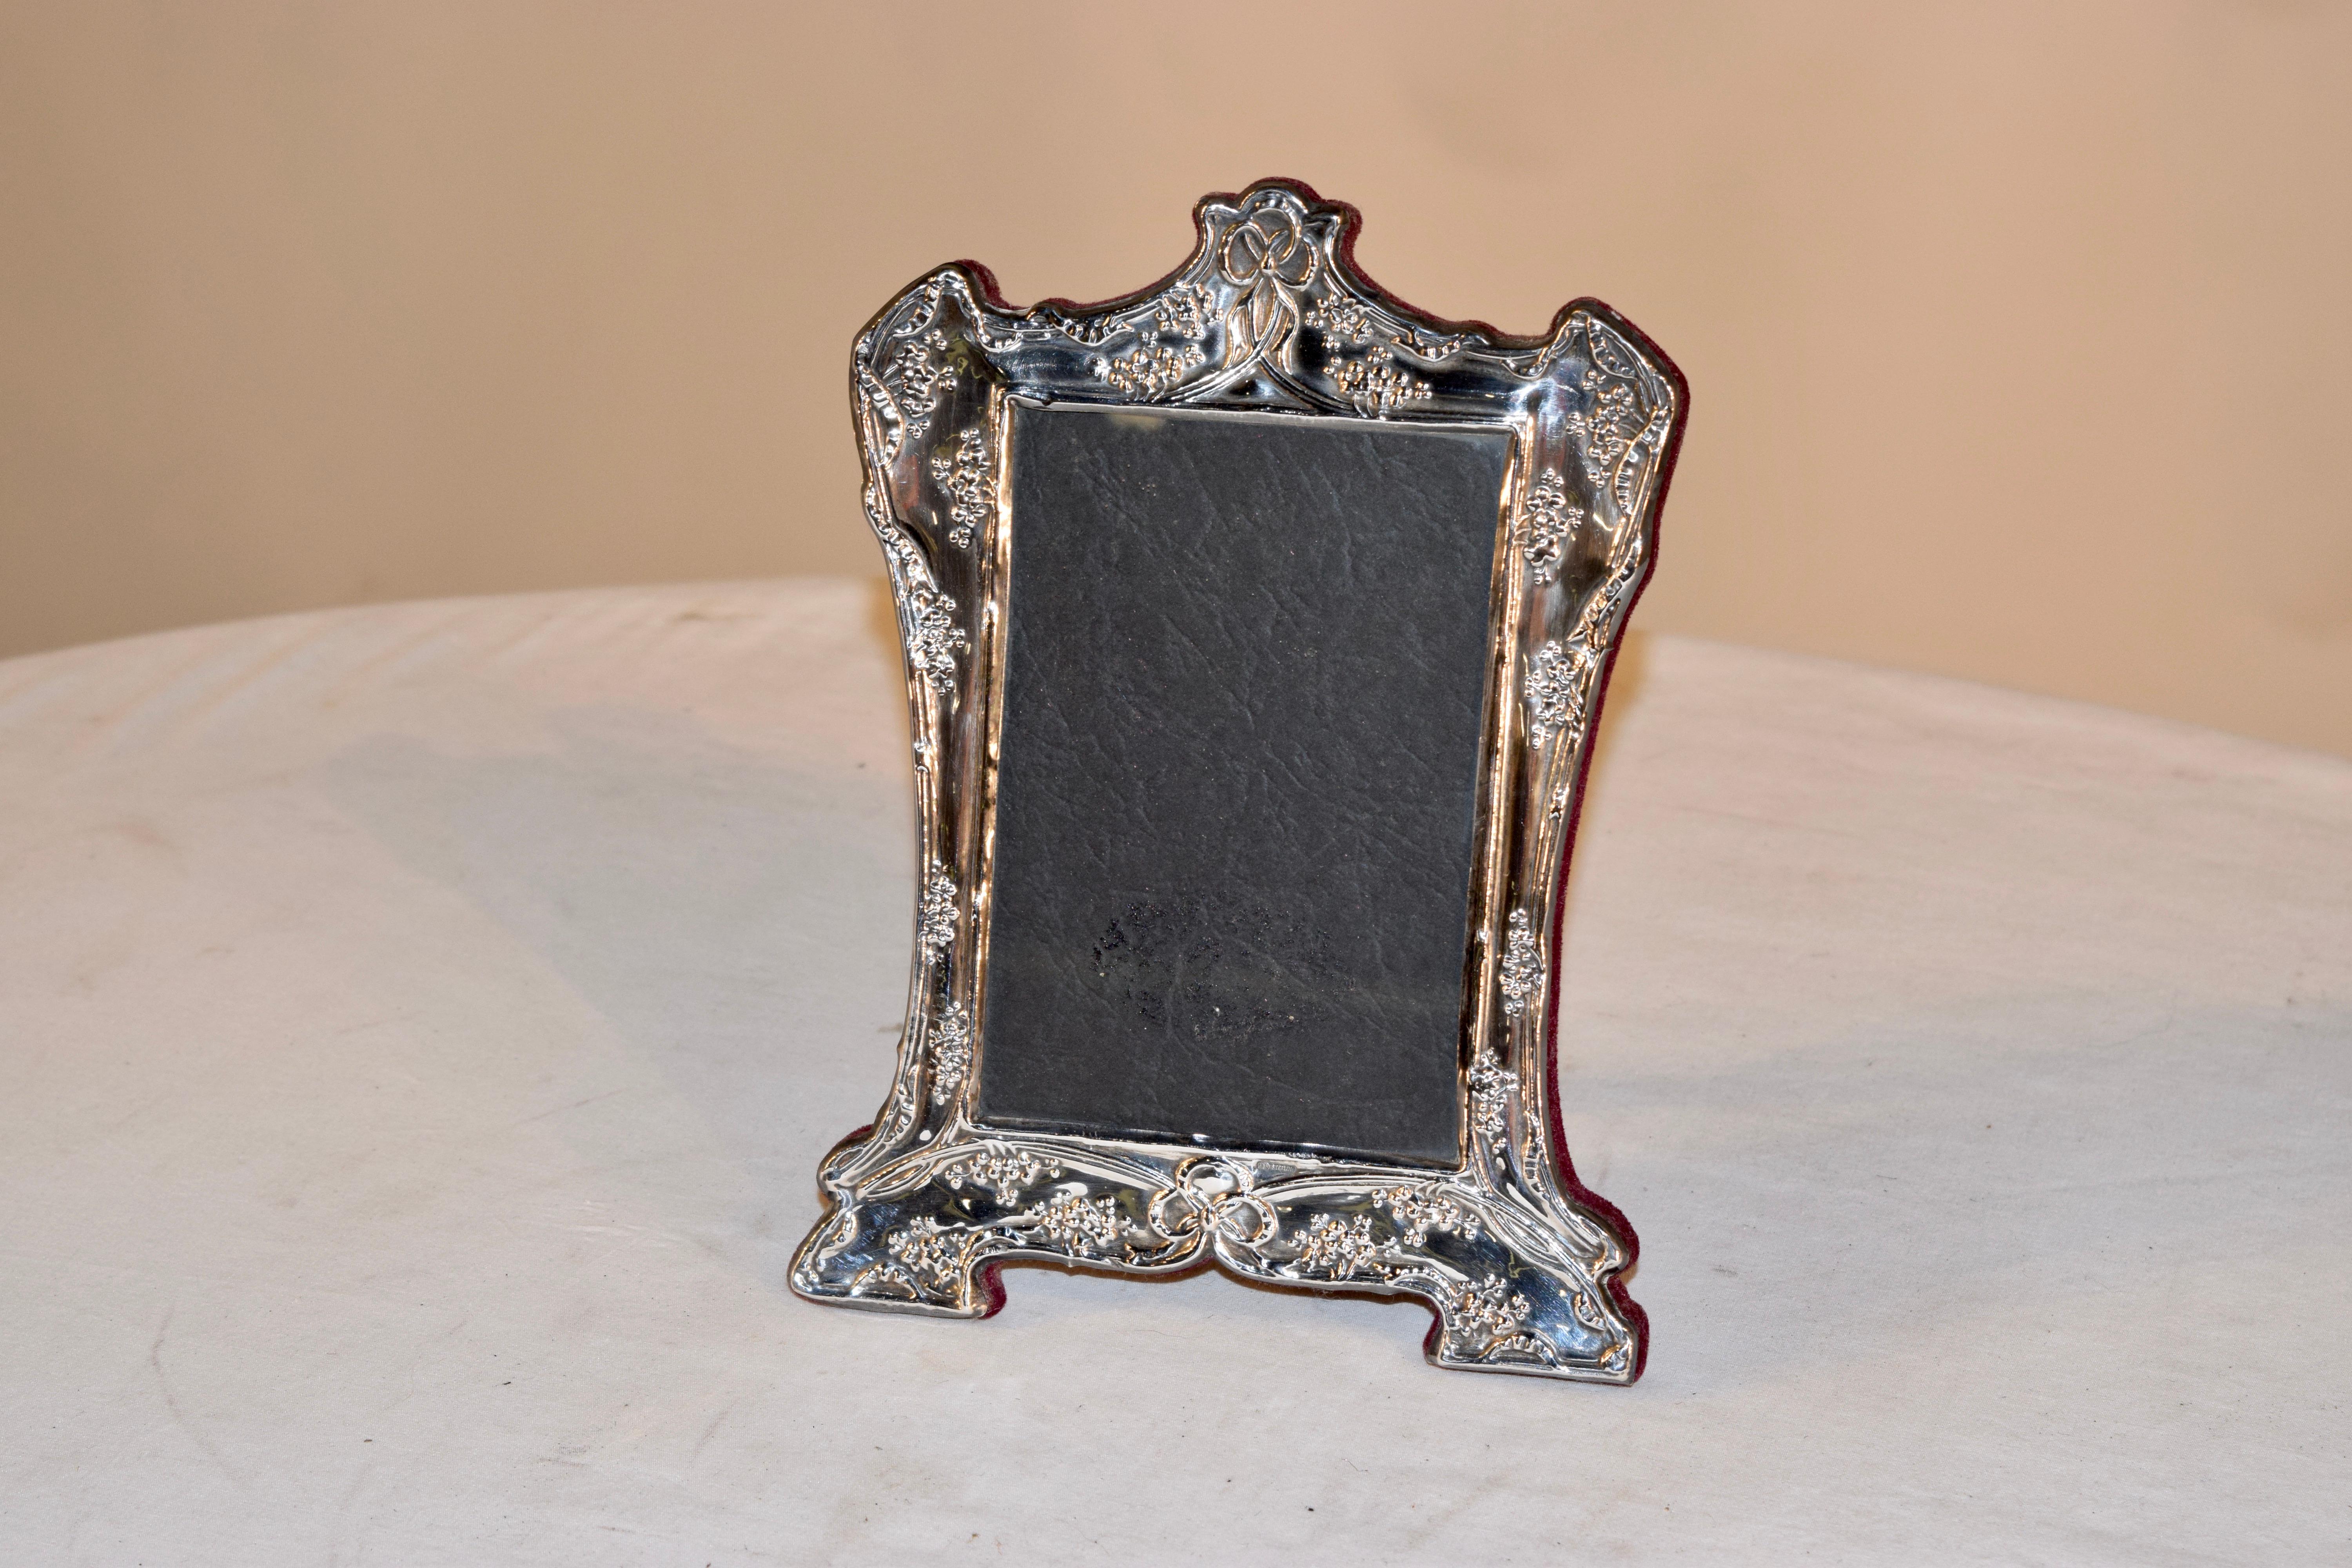 Lovely Art Nouveau picture frame with velvet covered back and stand. The frame has a graceful shape and is decorated with florals. Marked sterling at the bottom of the frame.